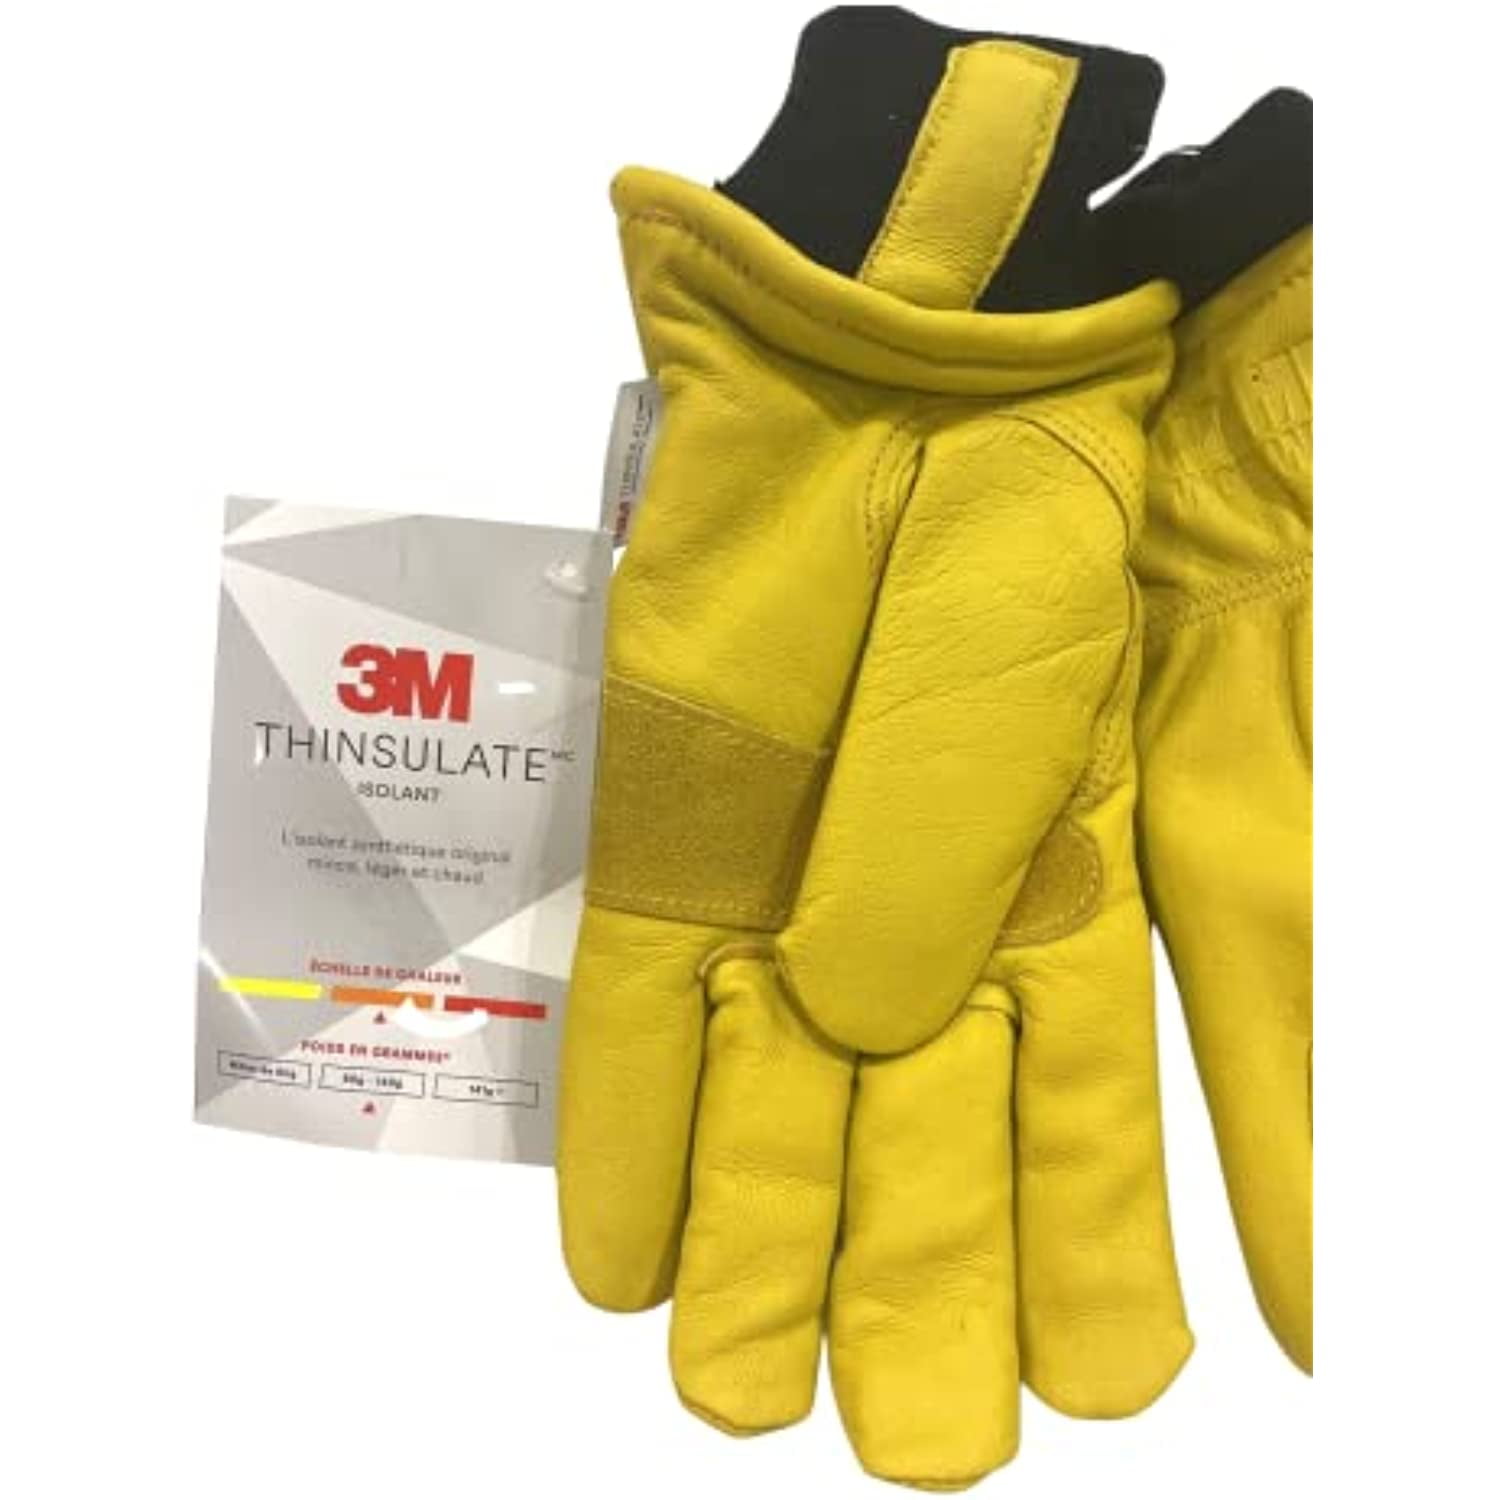 Wrench plumbing leather safety gloves construction concept.-223386